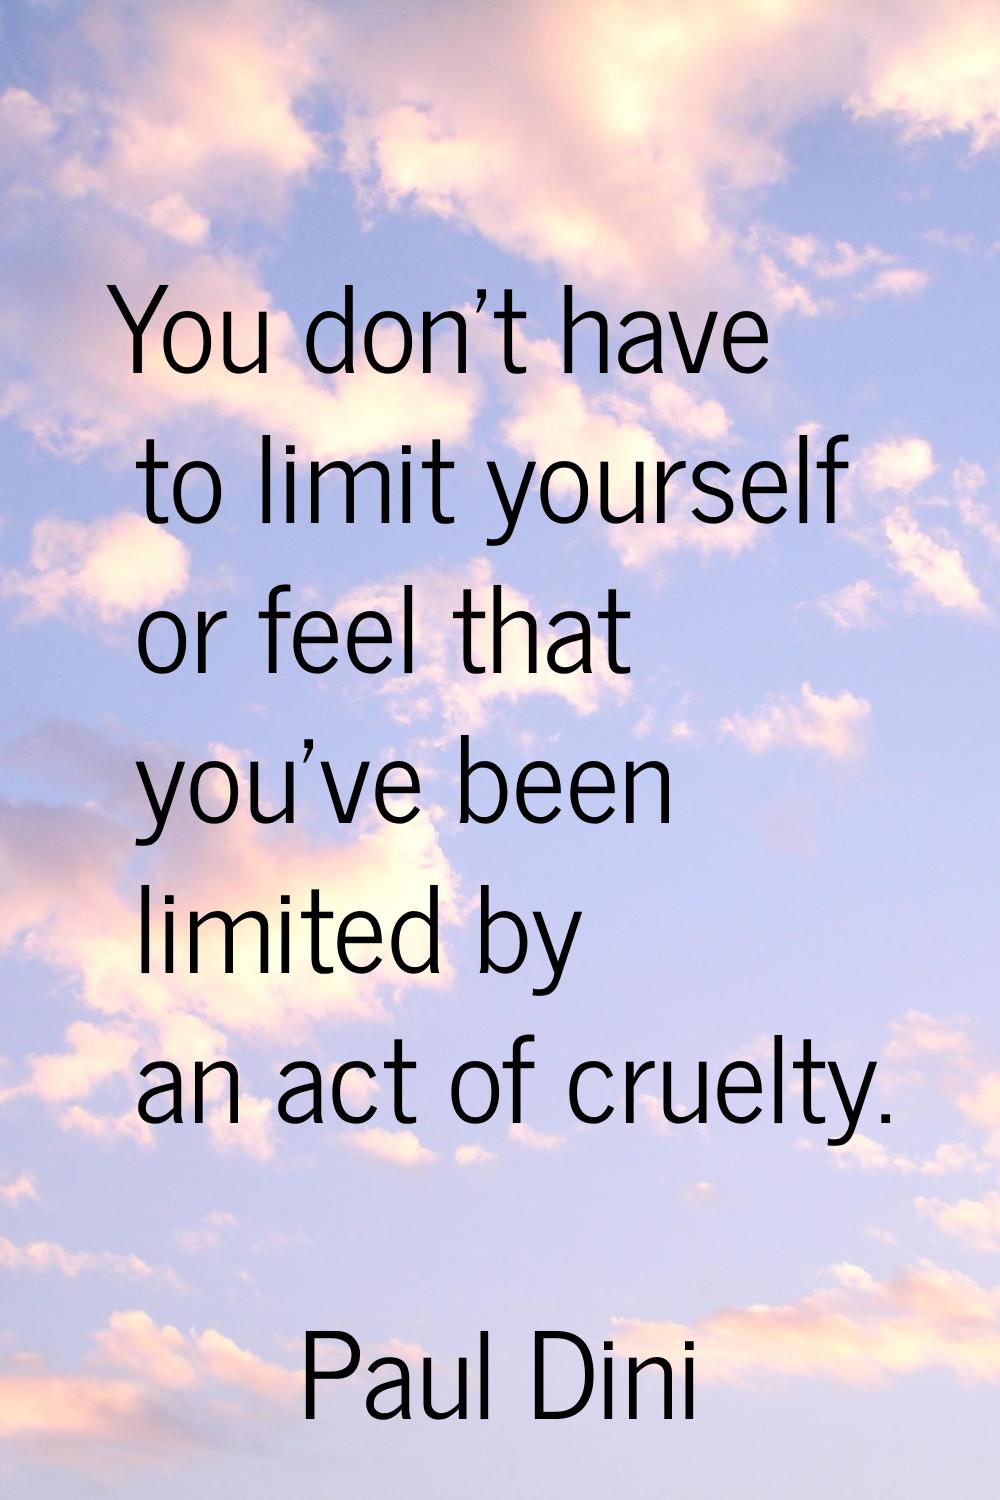 You don't have to limit yourself or feel that you've been limited by an act of cruelty.